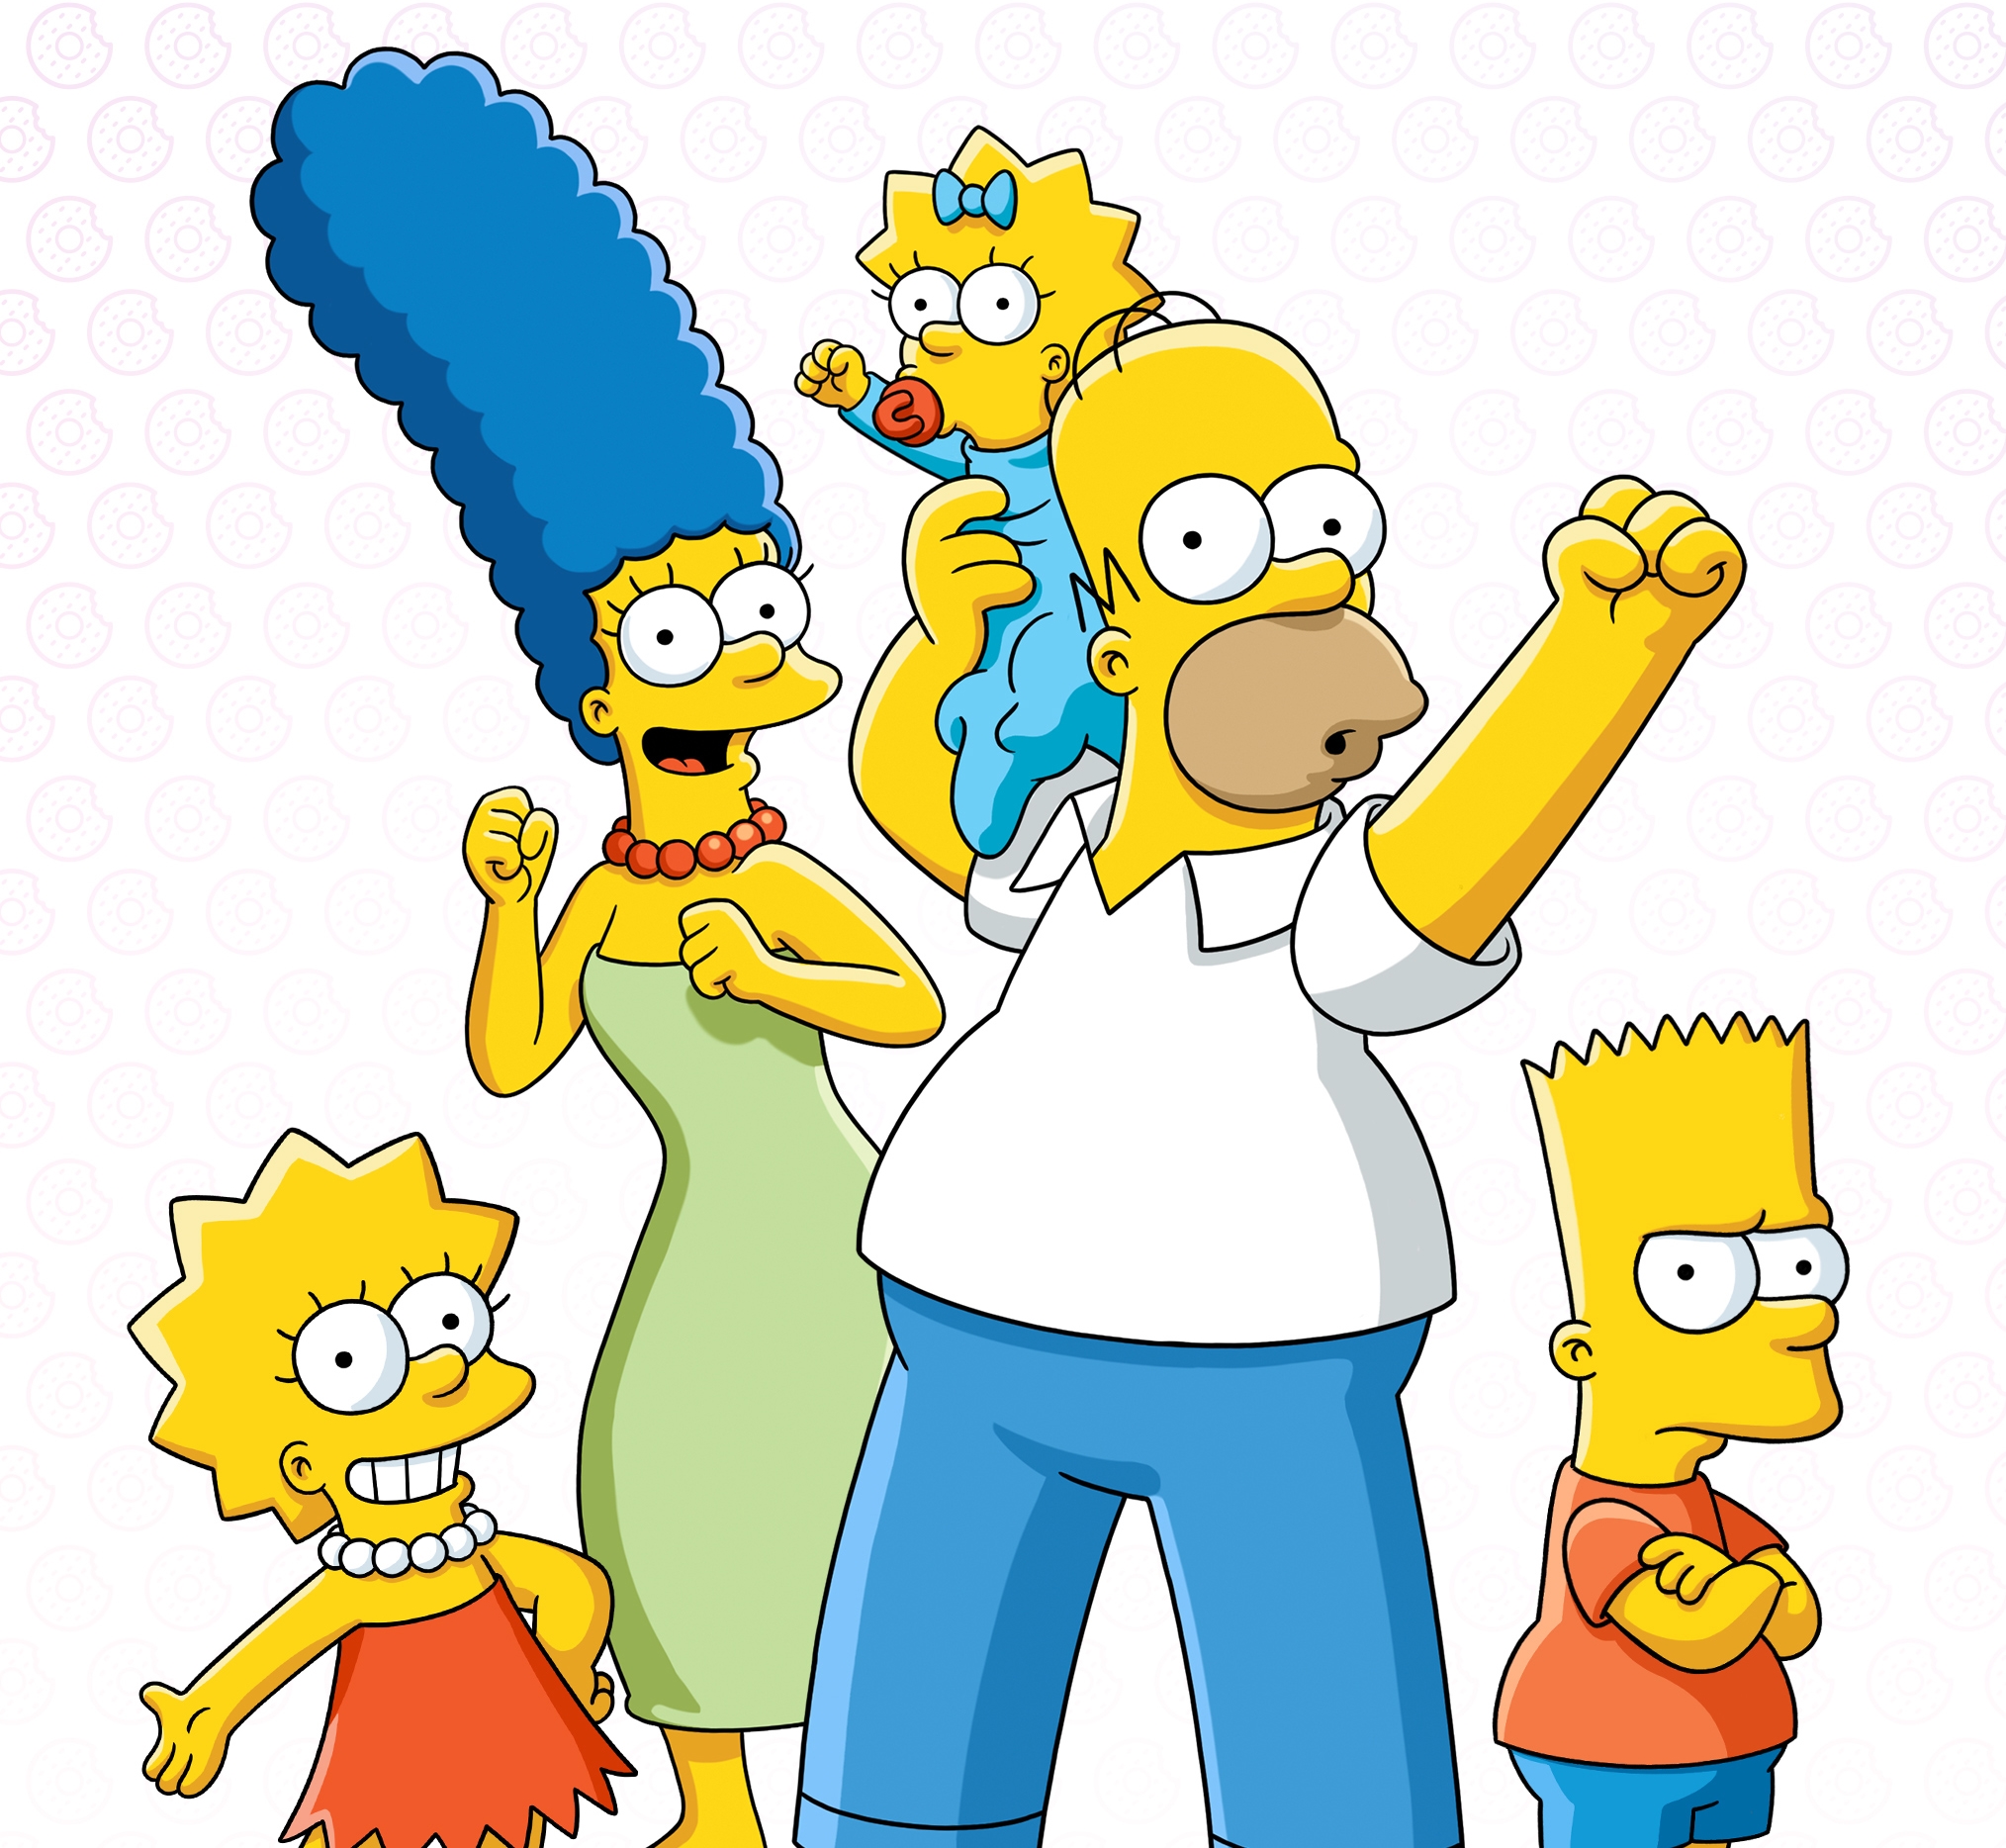 The Simpsons Season 33 Release Date When It Airs And Where To Watch?